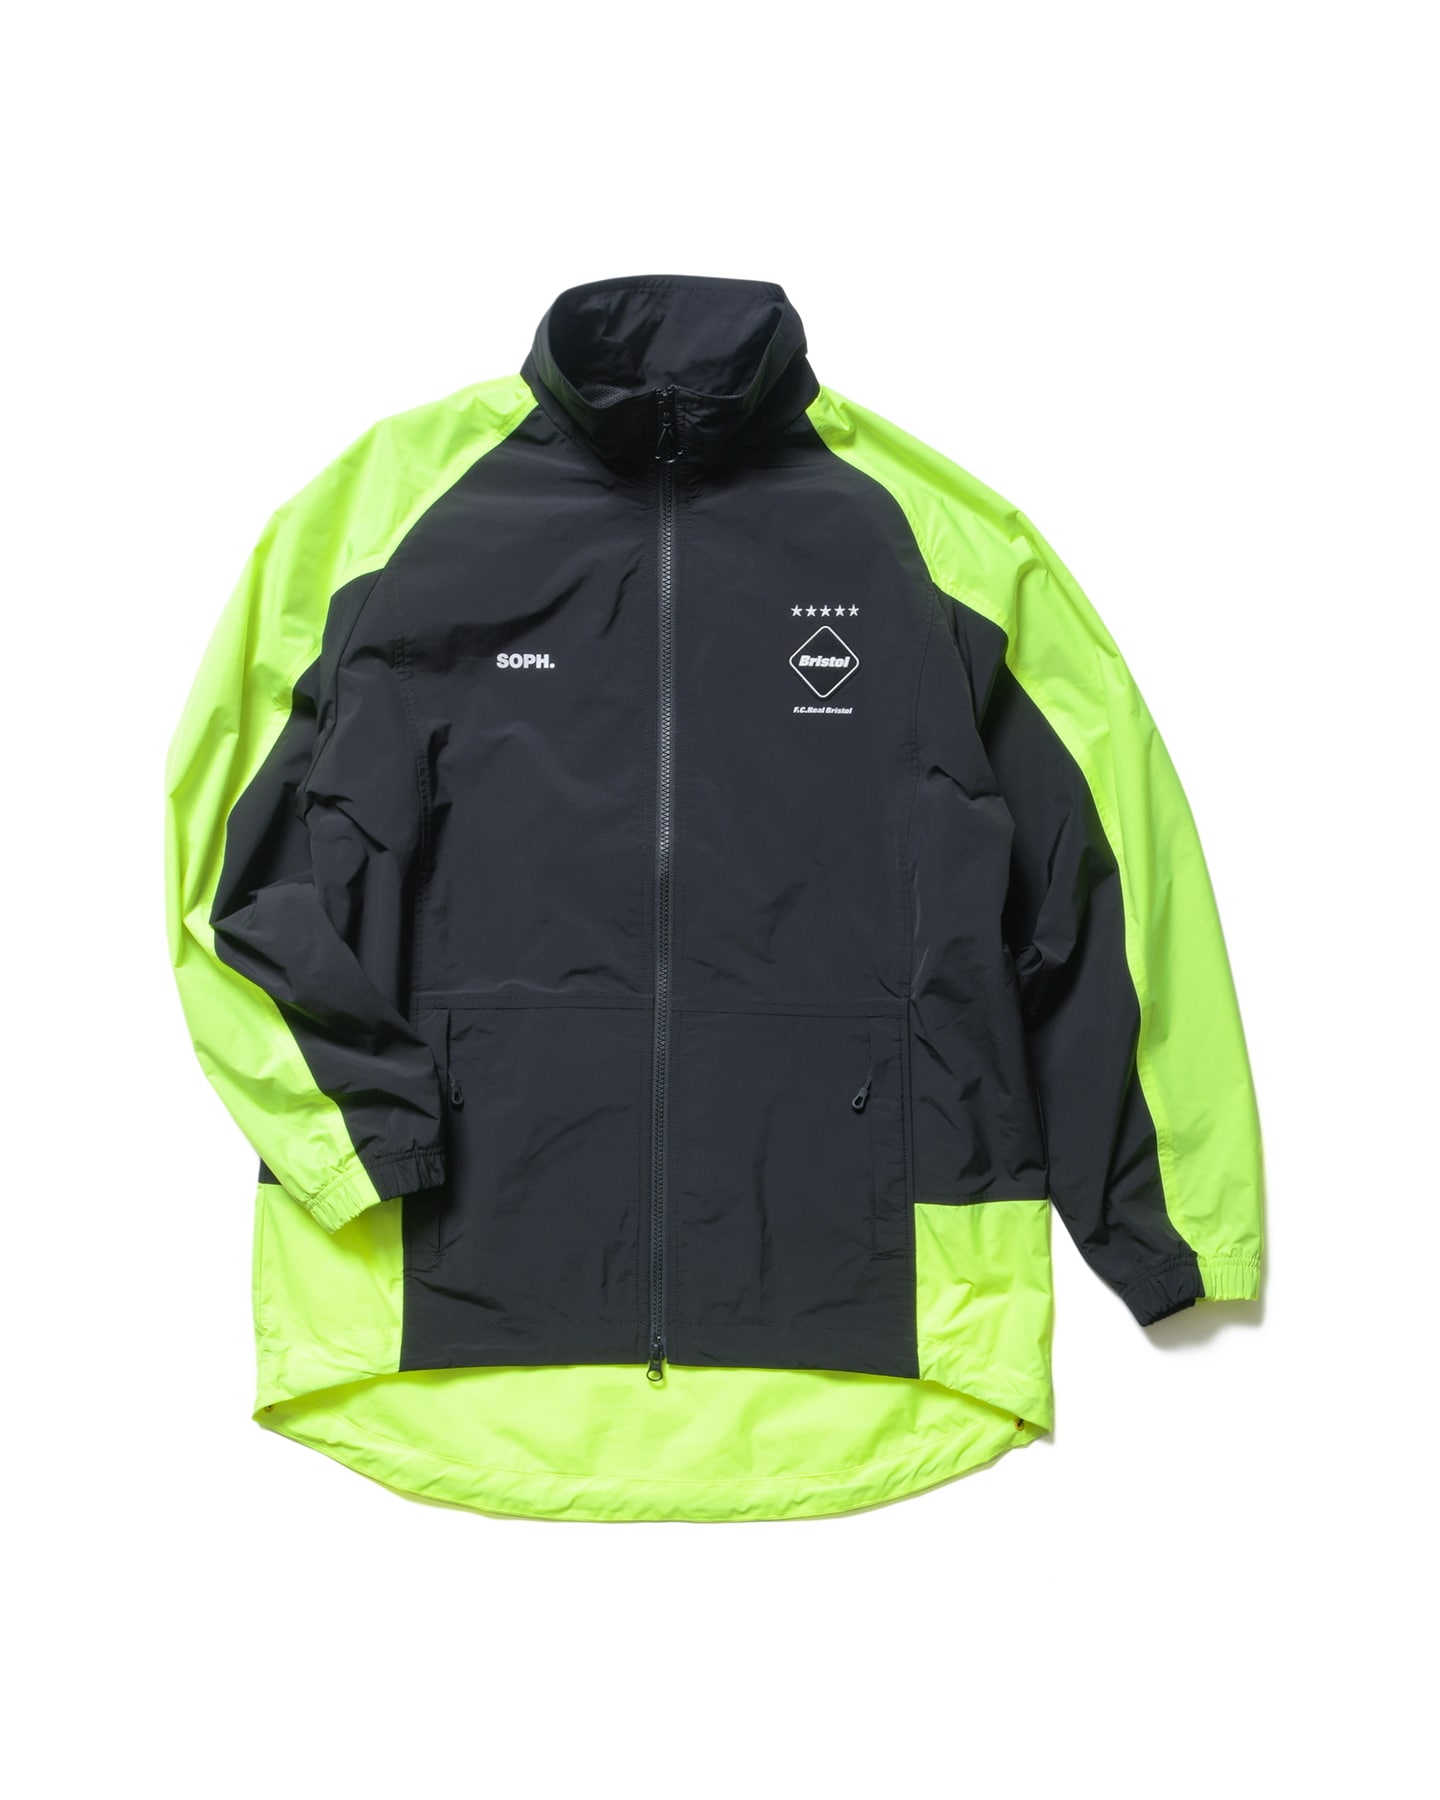 FCRB WARM UP JACKET(FCRB-192000)